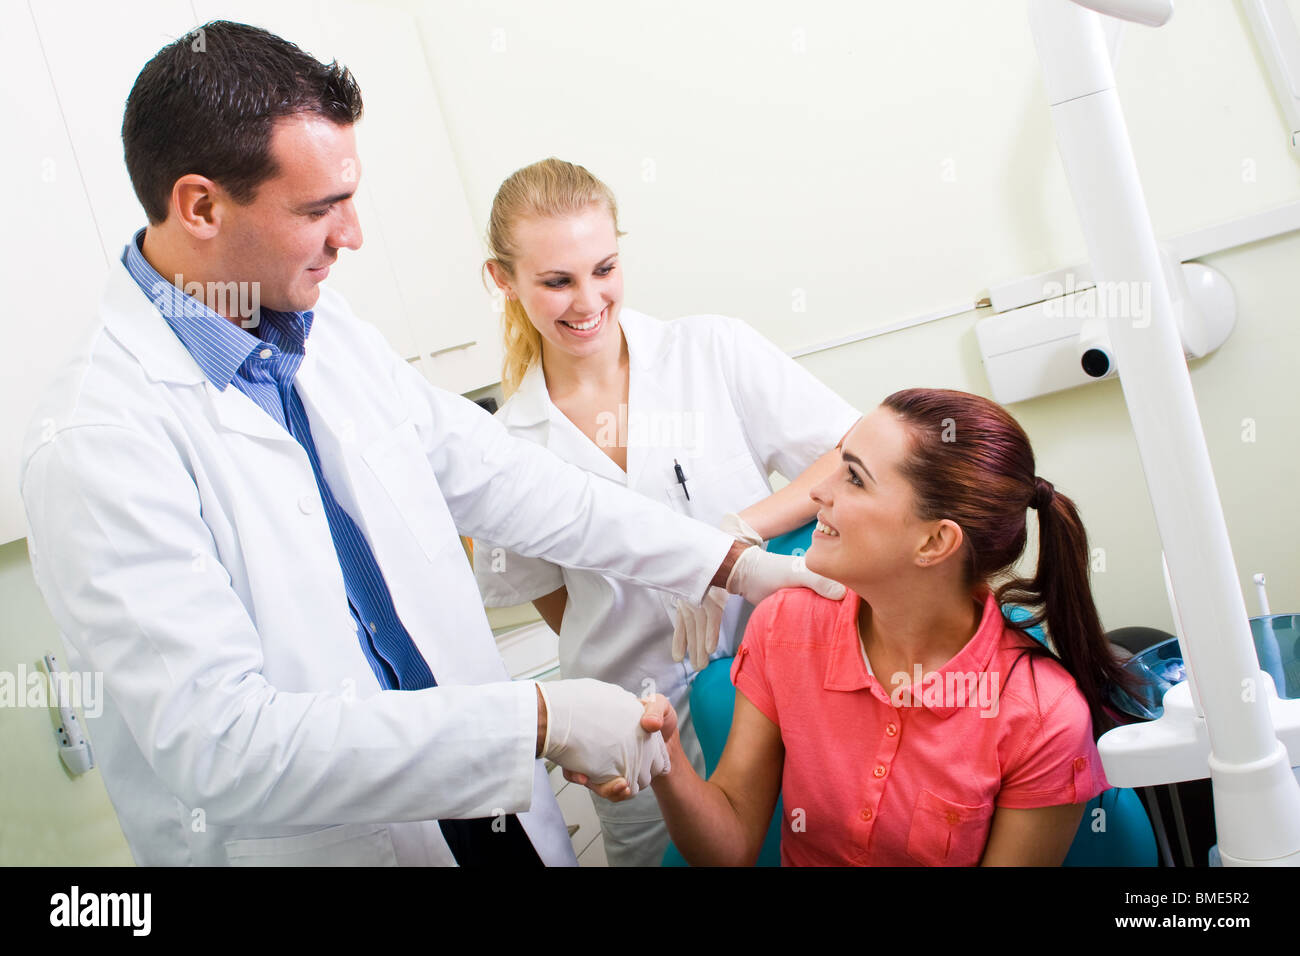 dentist or doctor congratulate patient for a successful operation Stock Photo